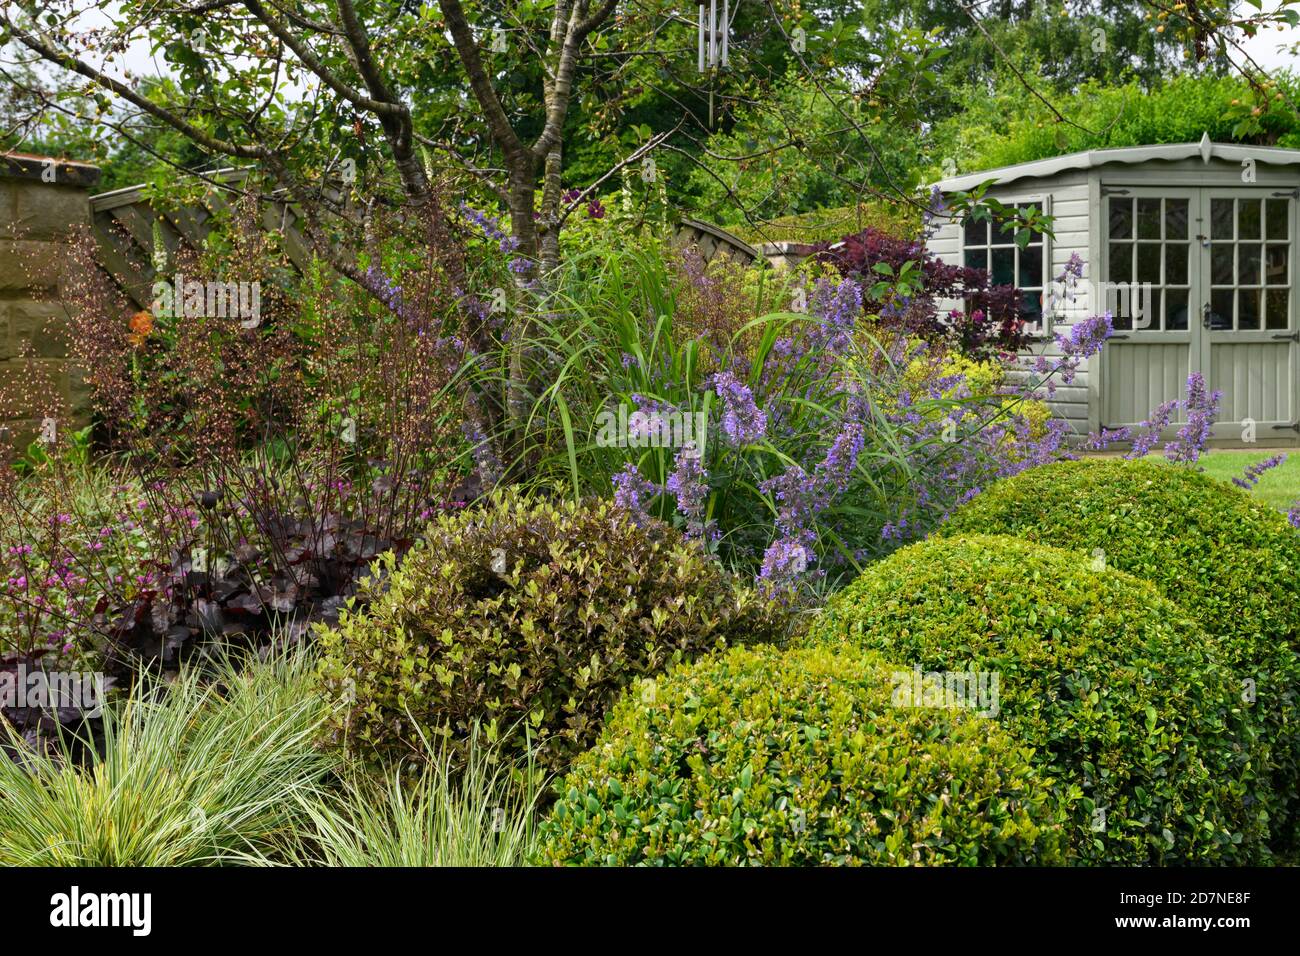 Landscaped private garden close-up (summer flowers, mixed border plants, shrubs, box balls, cherry tree, summerhouse shed) - Yorkshire, England UK Stock Photo